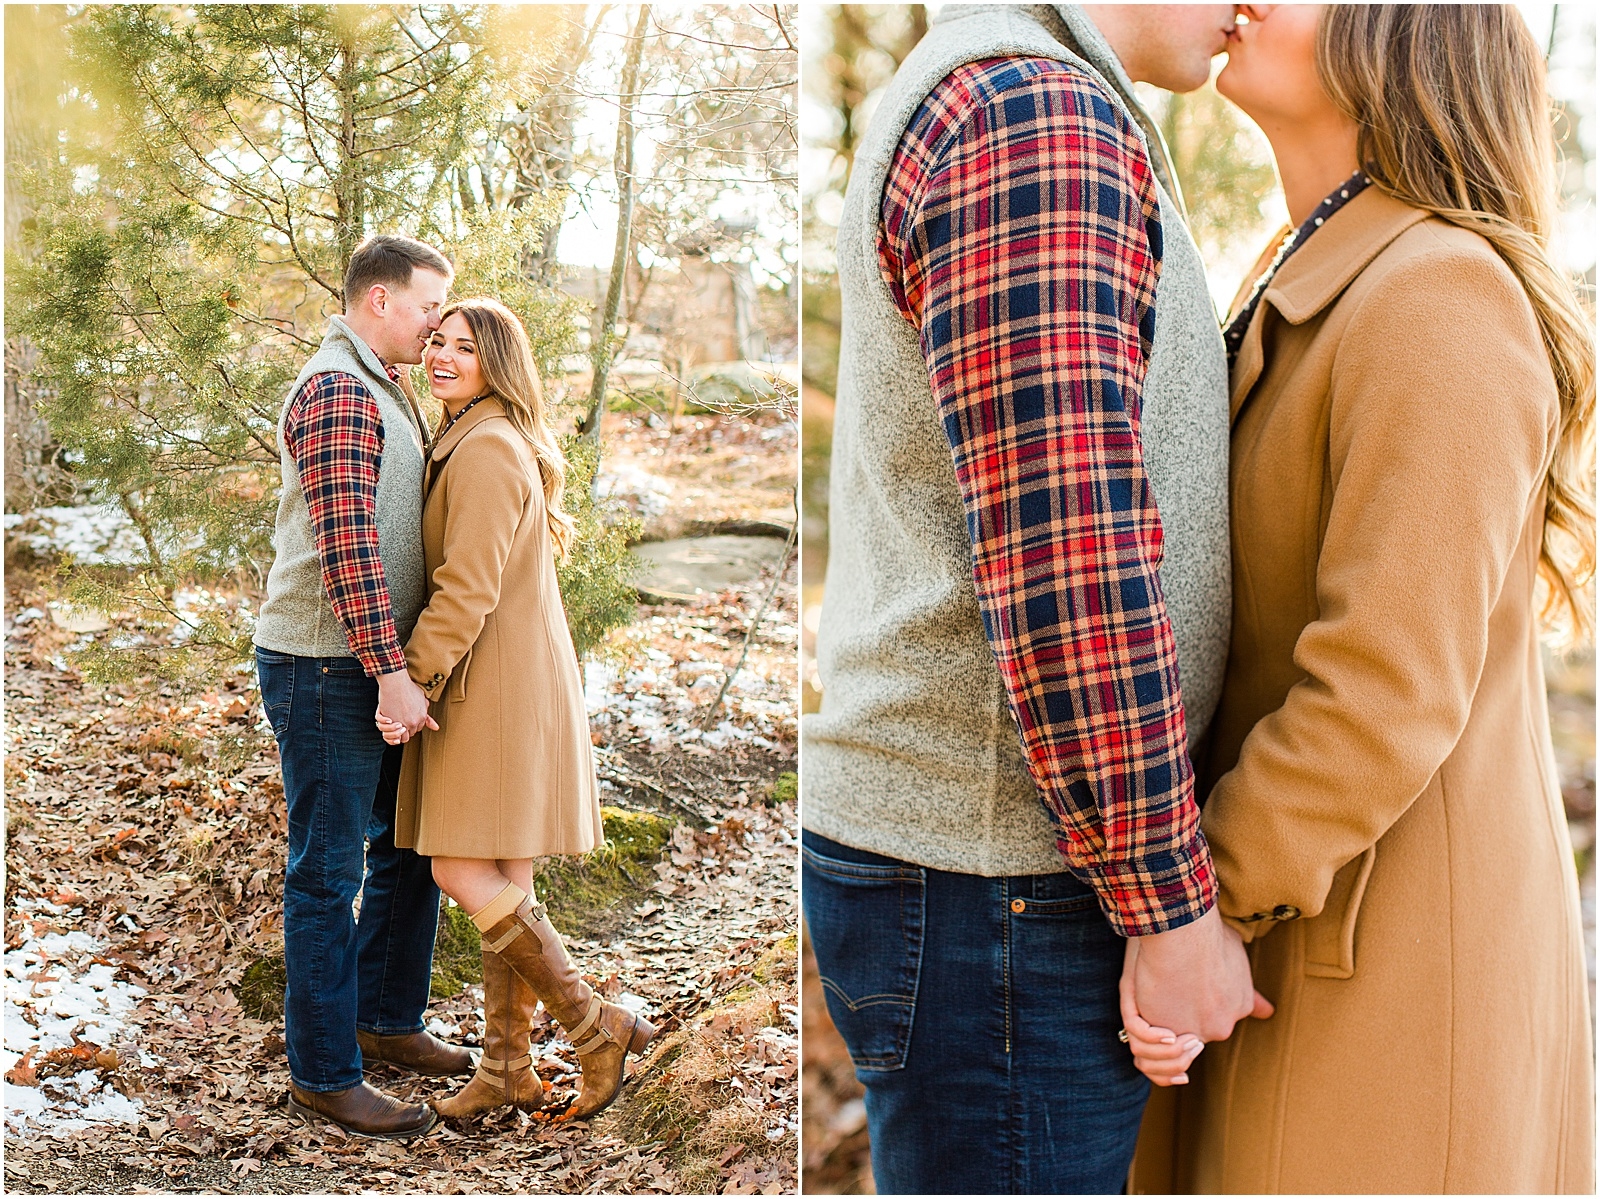 A Sunny Garden of the Gods Engagement Session | Shiloh and Lee | Bret and Brandie Photography027.jpg